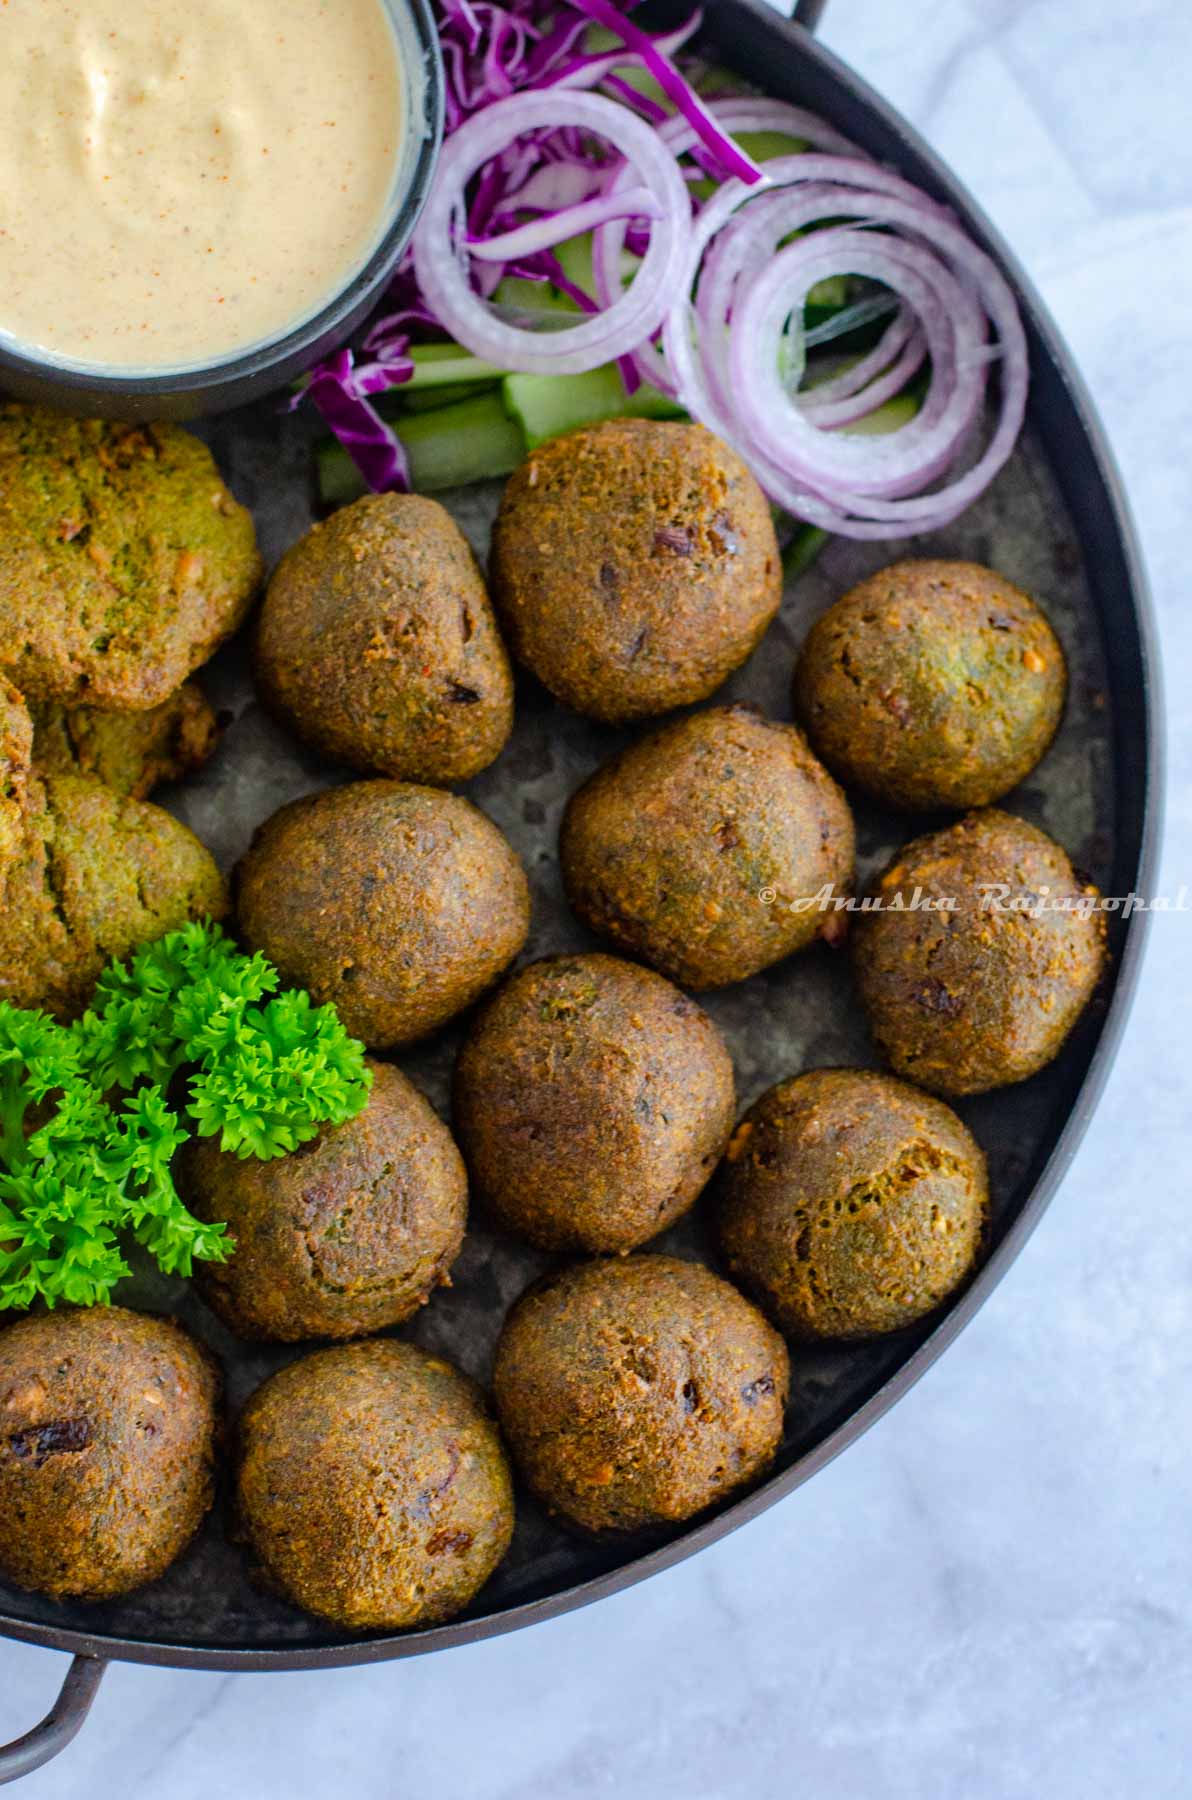 deep fried falafels arranged on a metal serving tray with parsley, a creamy dip and chopped veggies